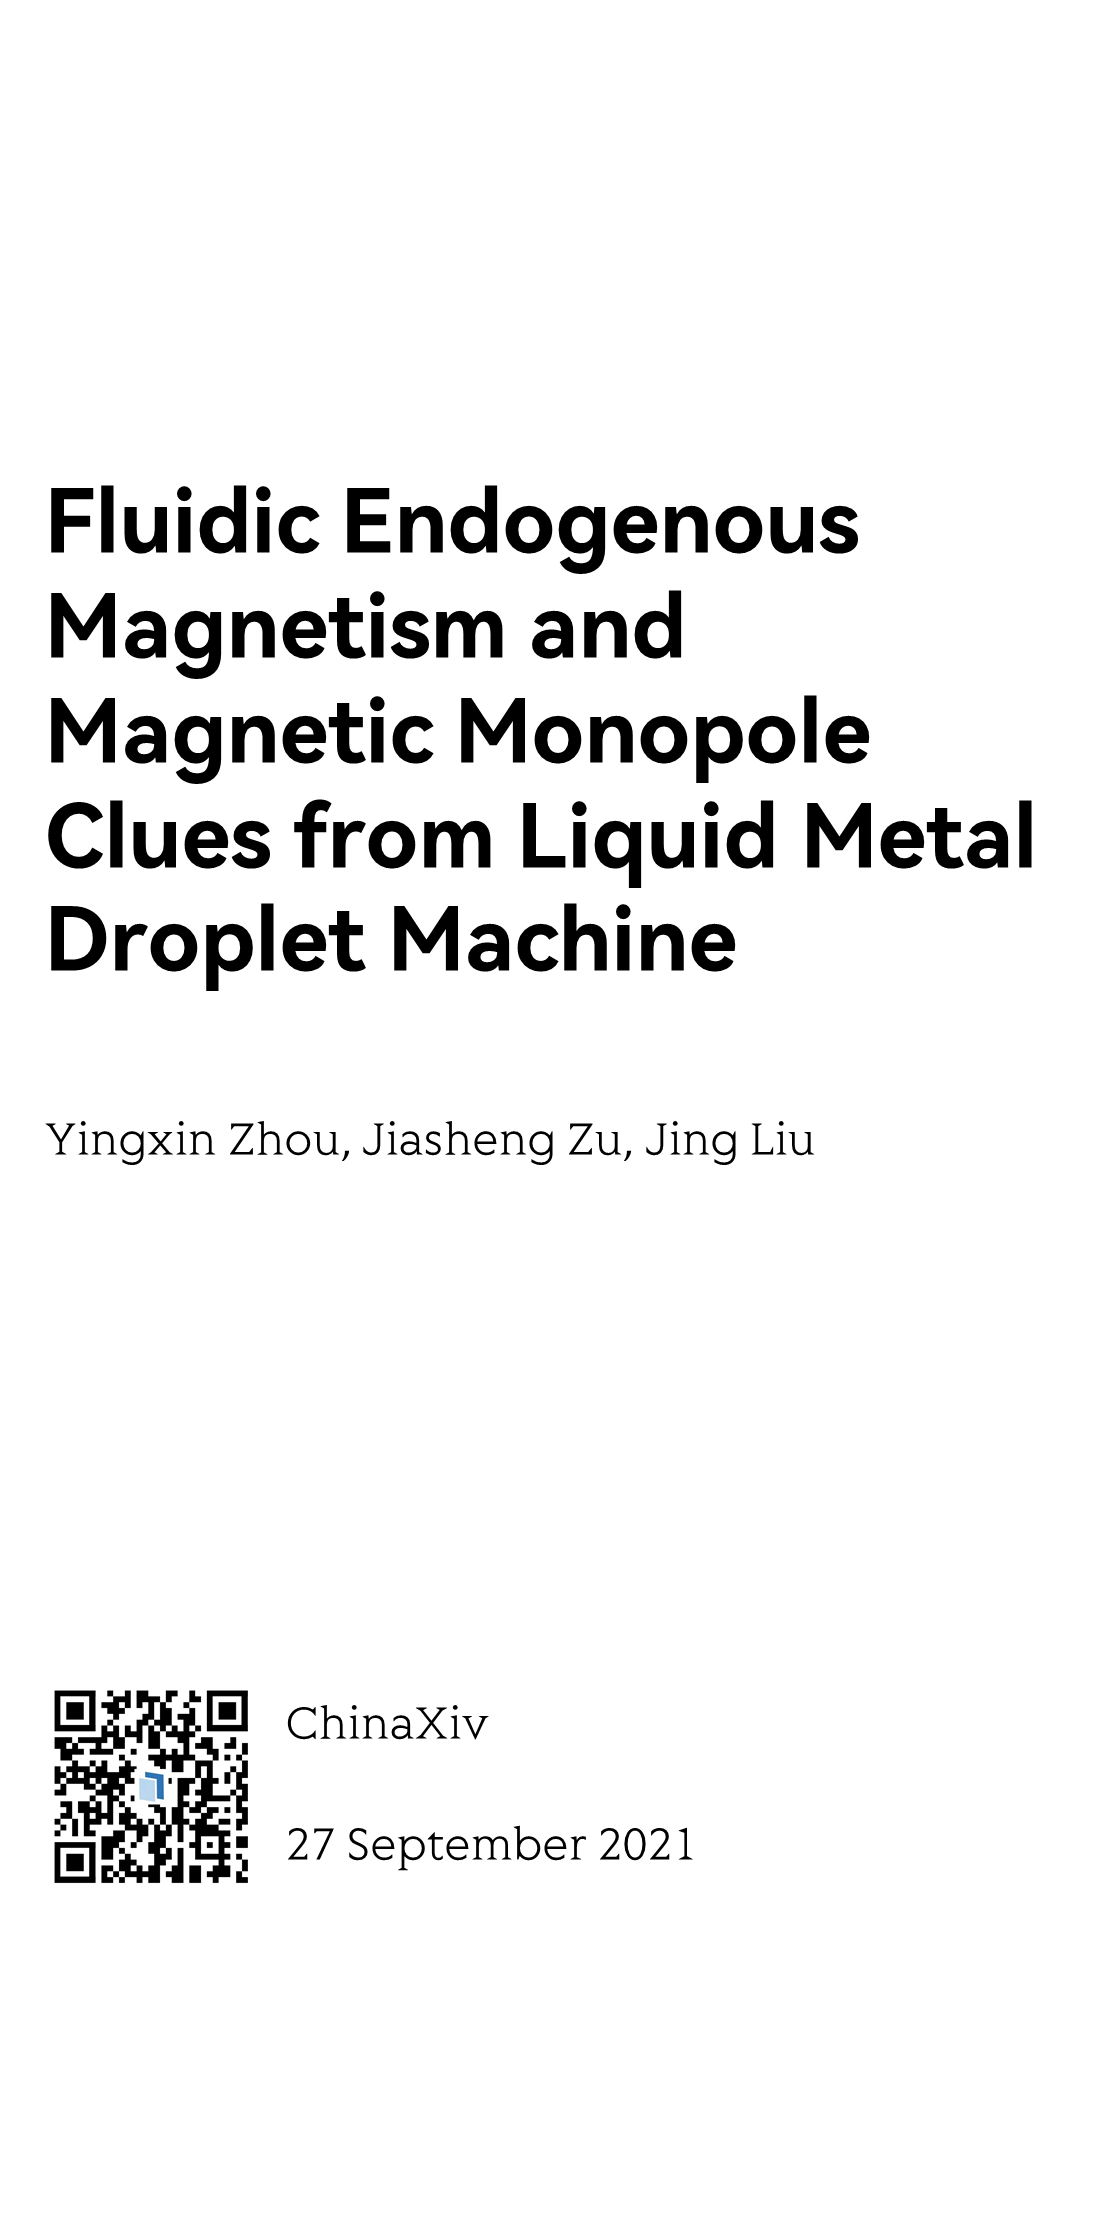 Fluidic Endogenous Magnetism and Magnetic Monopole Clues from Liquid Metal Droplet Machine_1